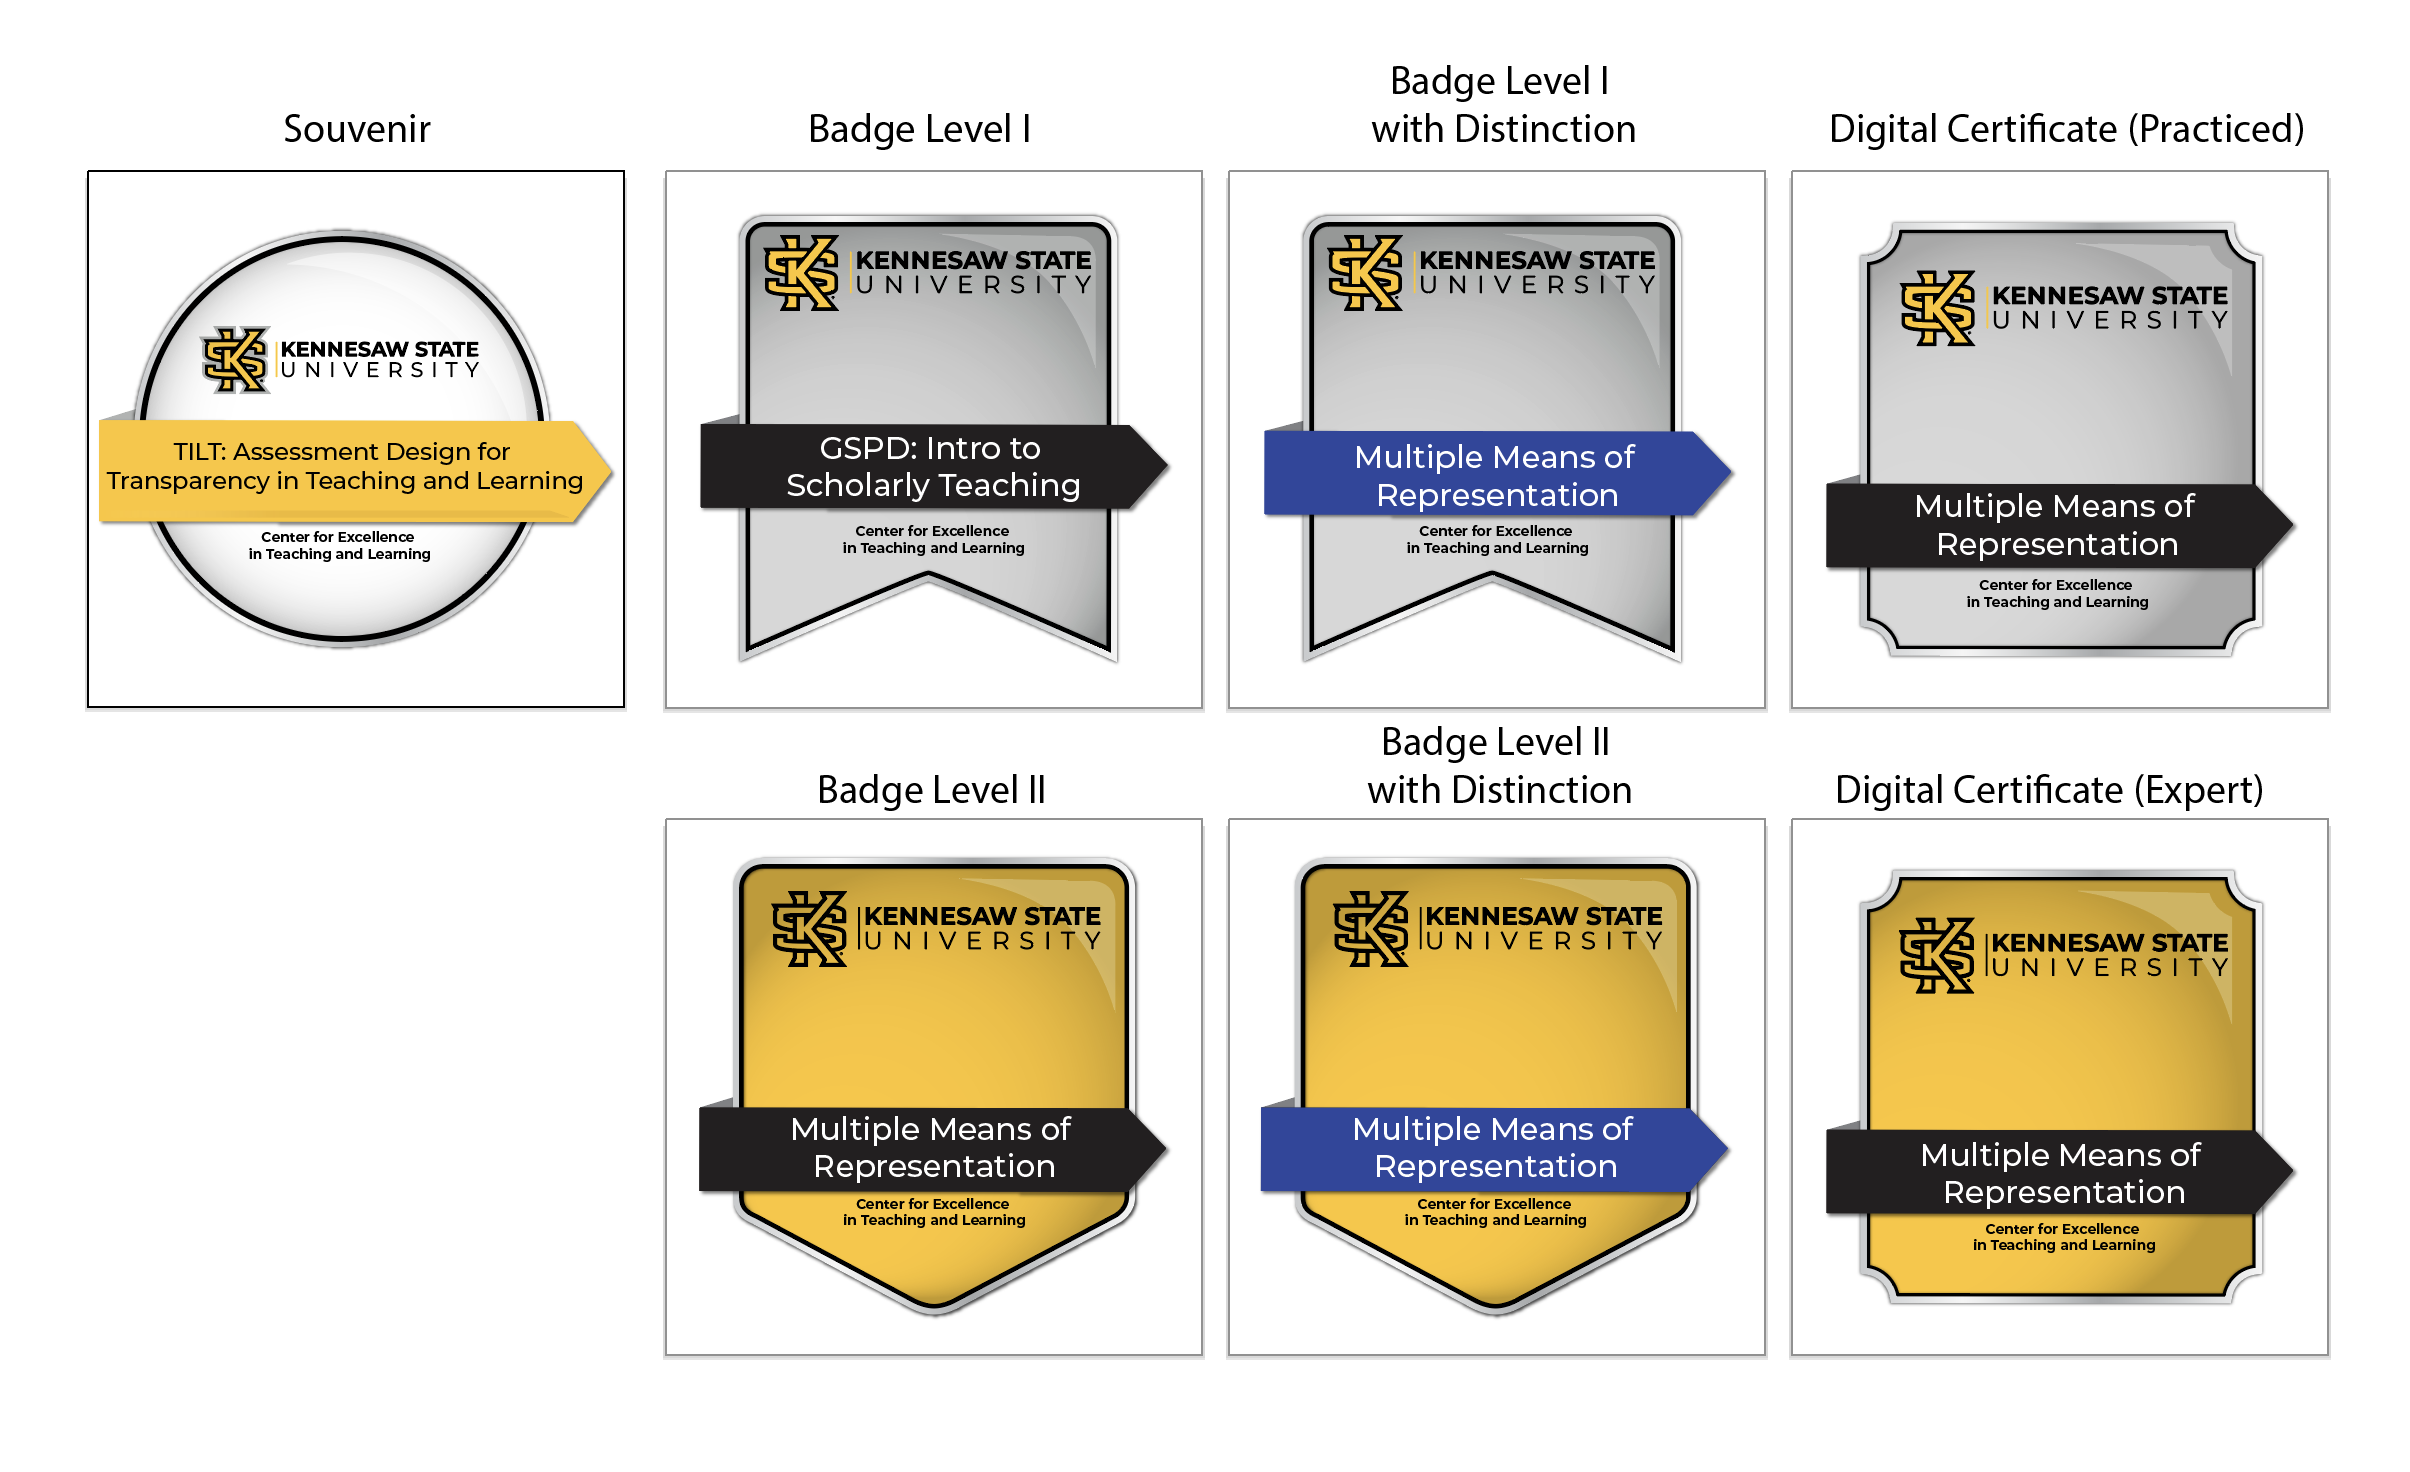 white, silver, and gold credential images